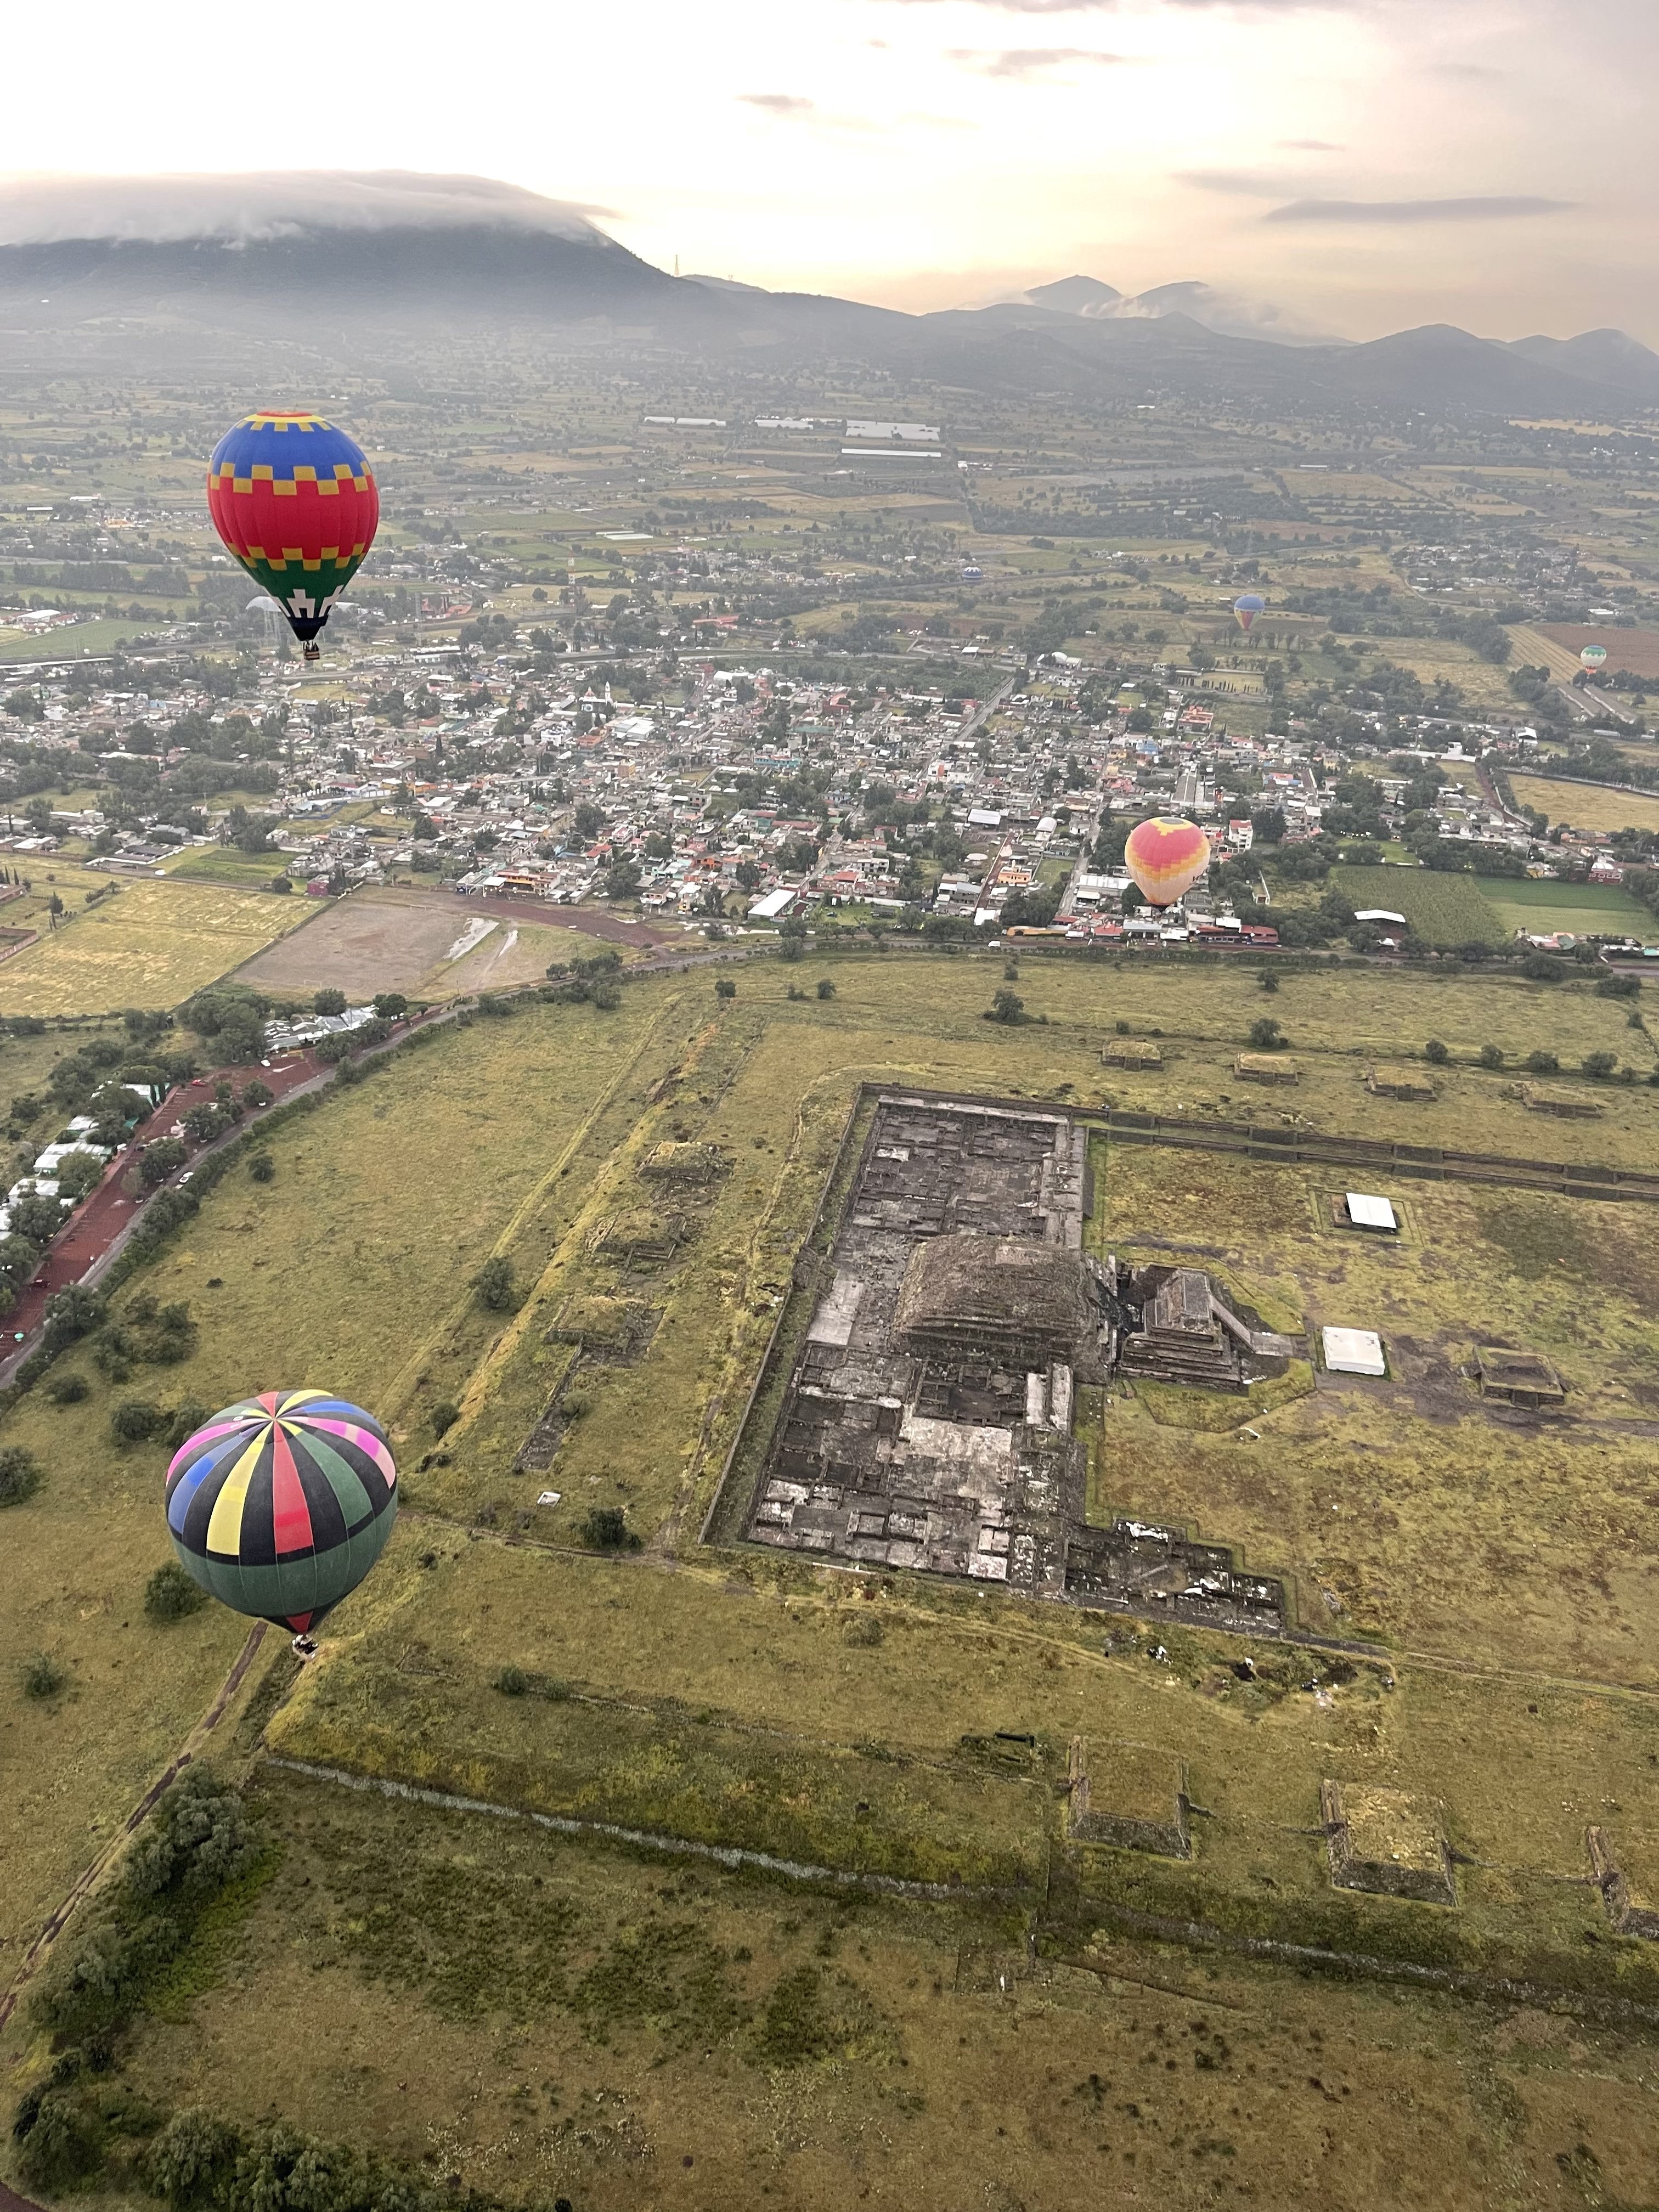 The view of the Temple of Quetzalcoatl via hot air balloon!